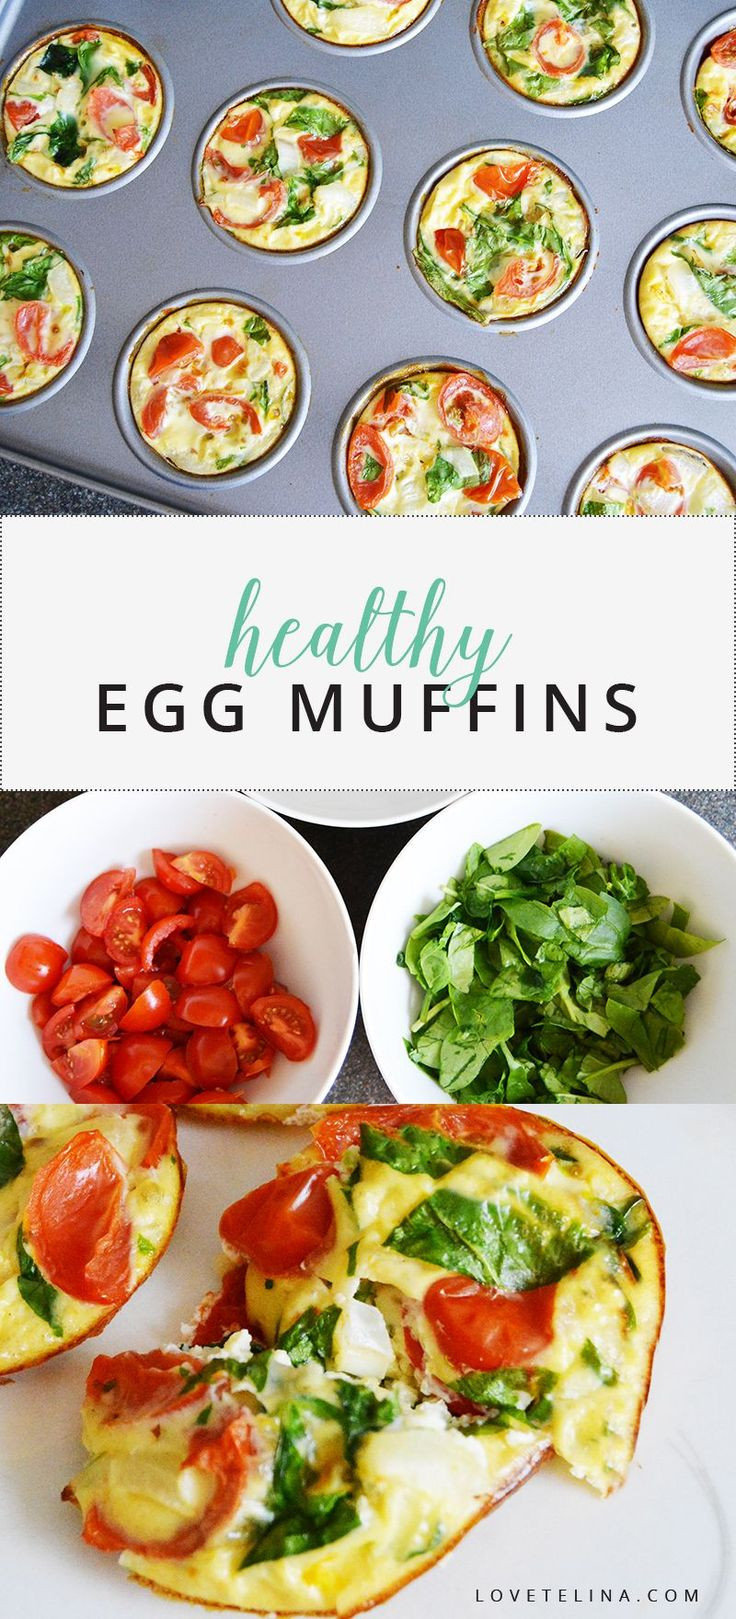 Something Healthy To Eat For Breakfast
 The 25 best Healthy eating ideas on Pinterest